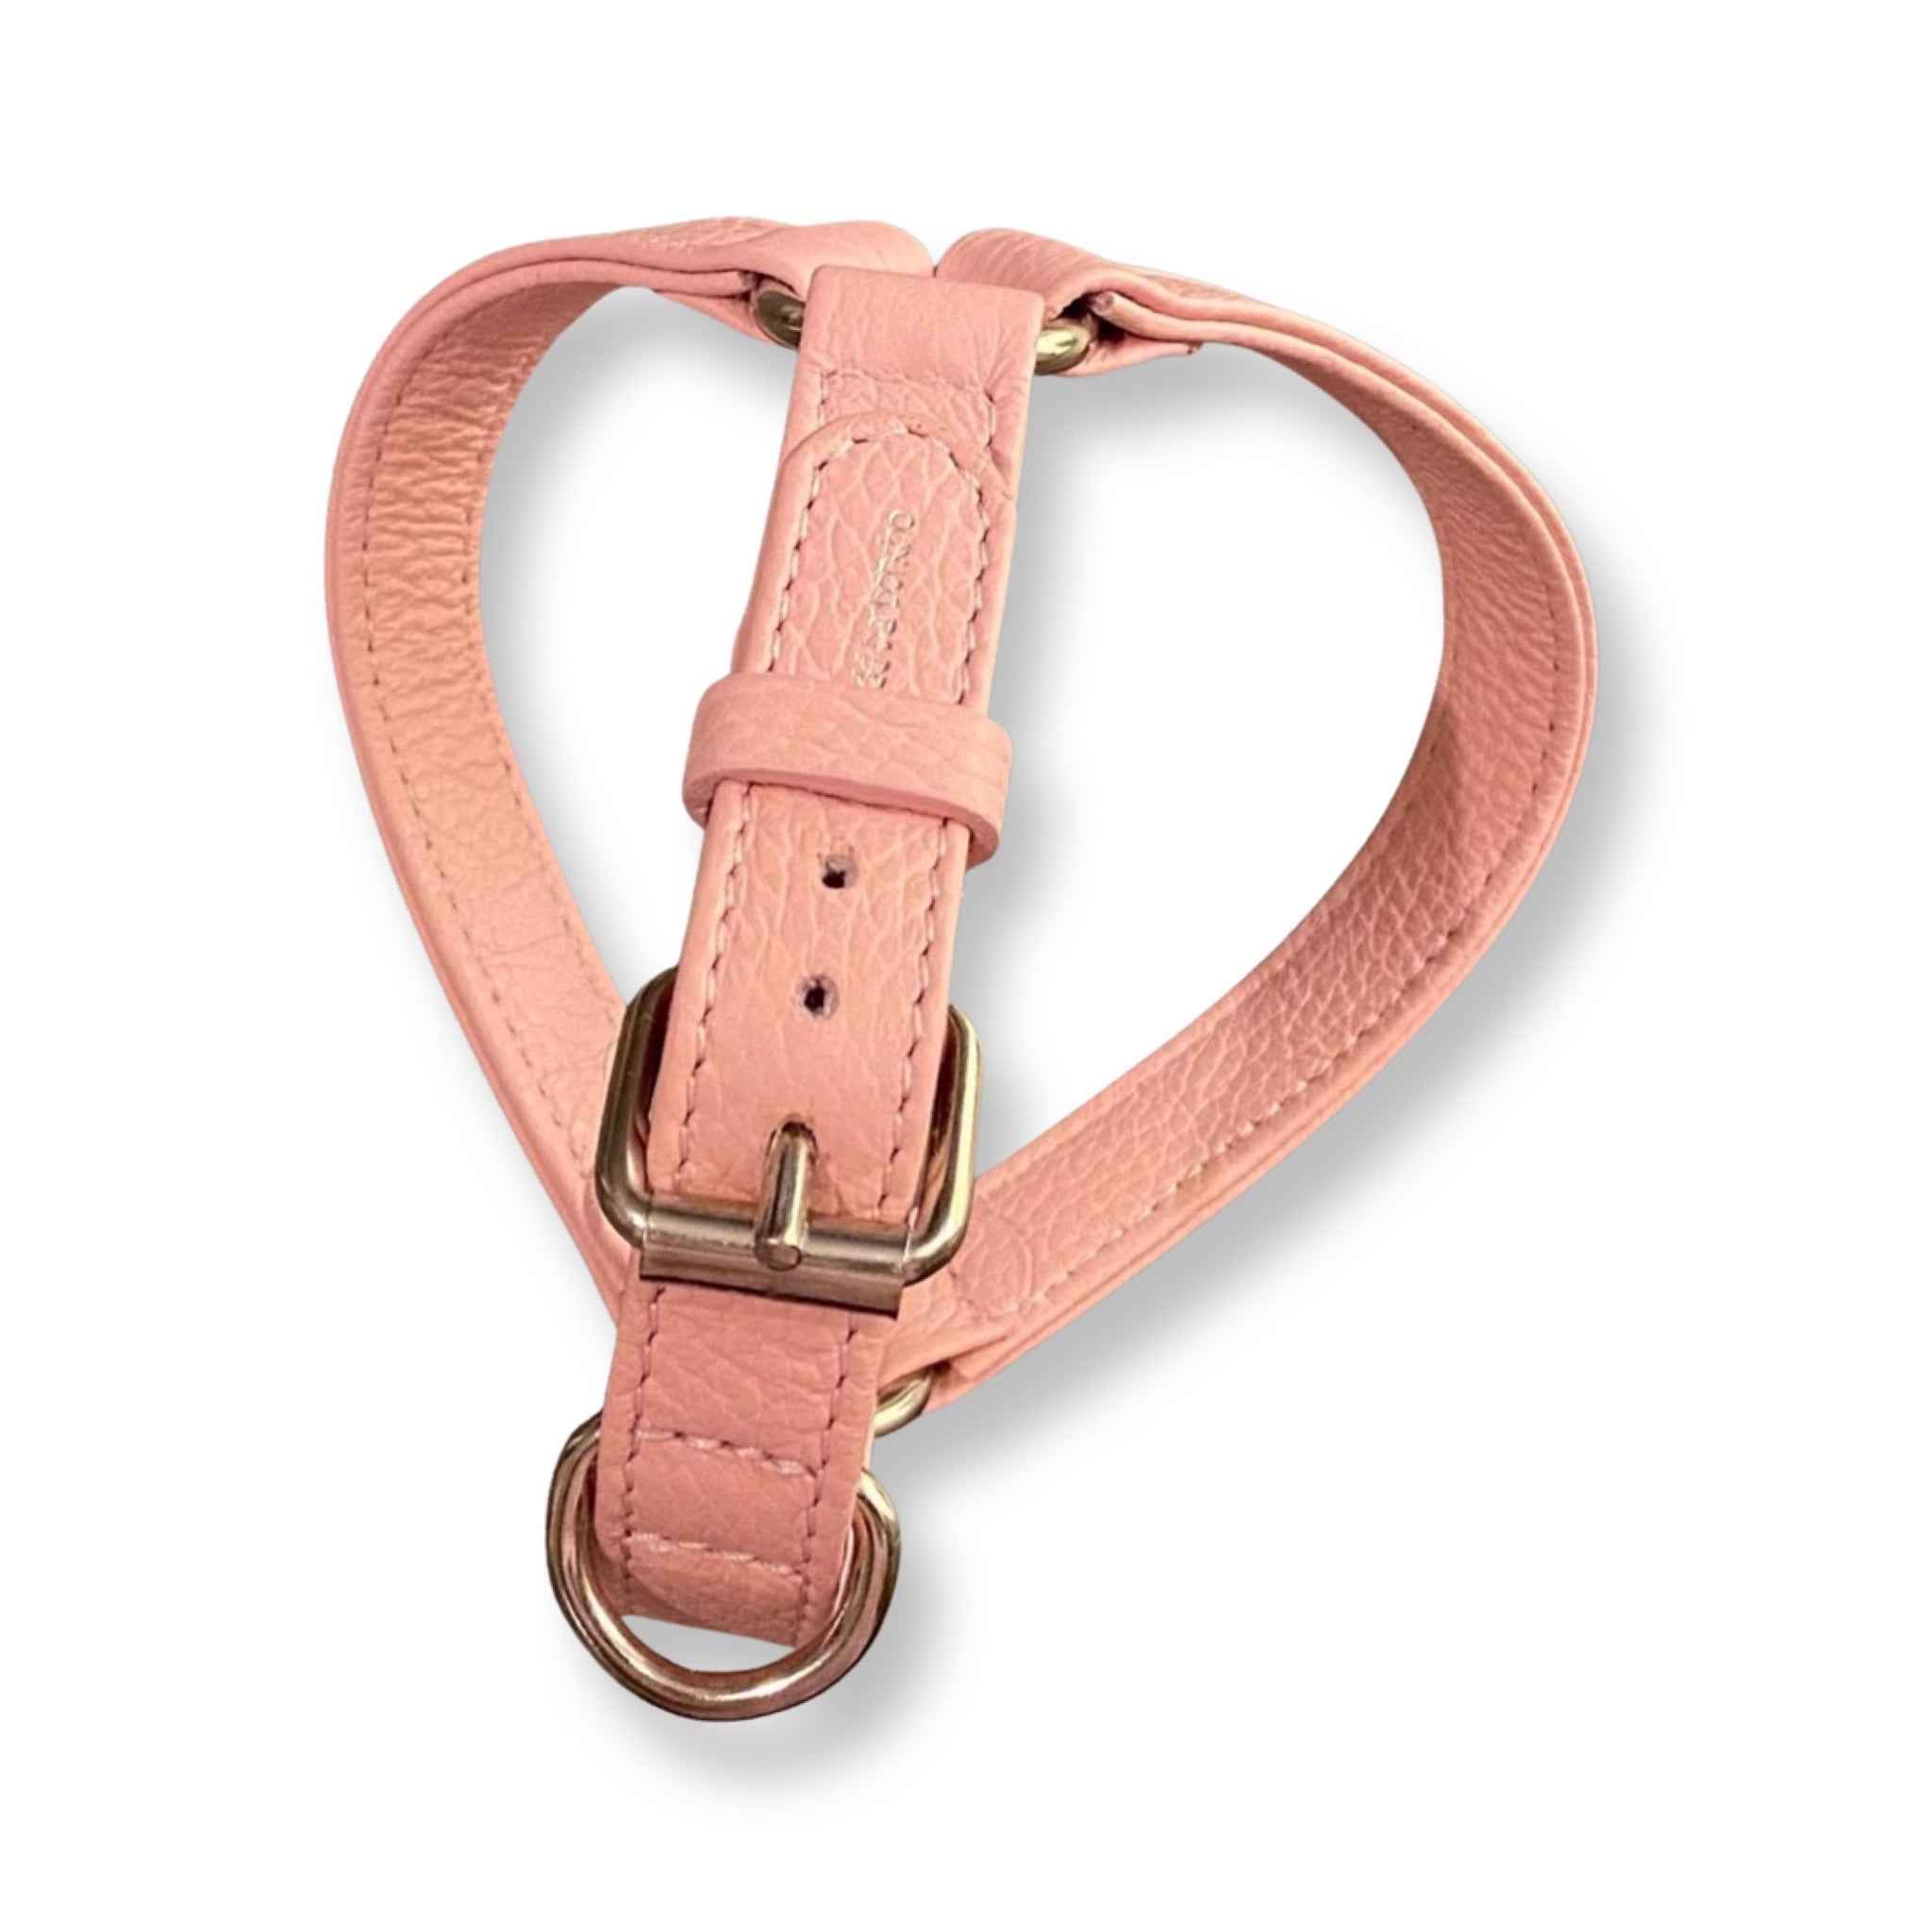 Pink leather harness